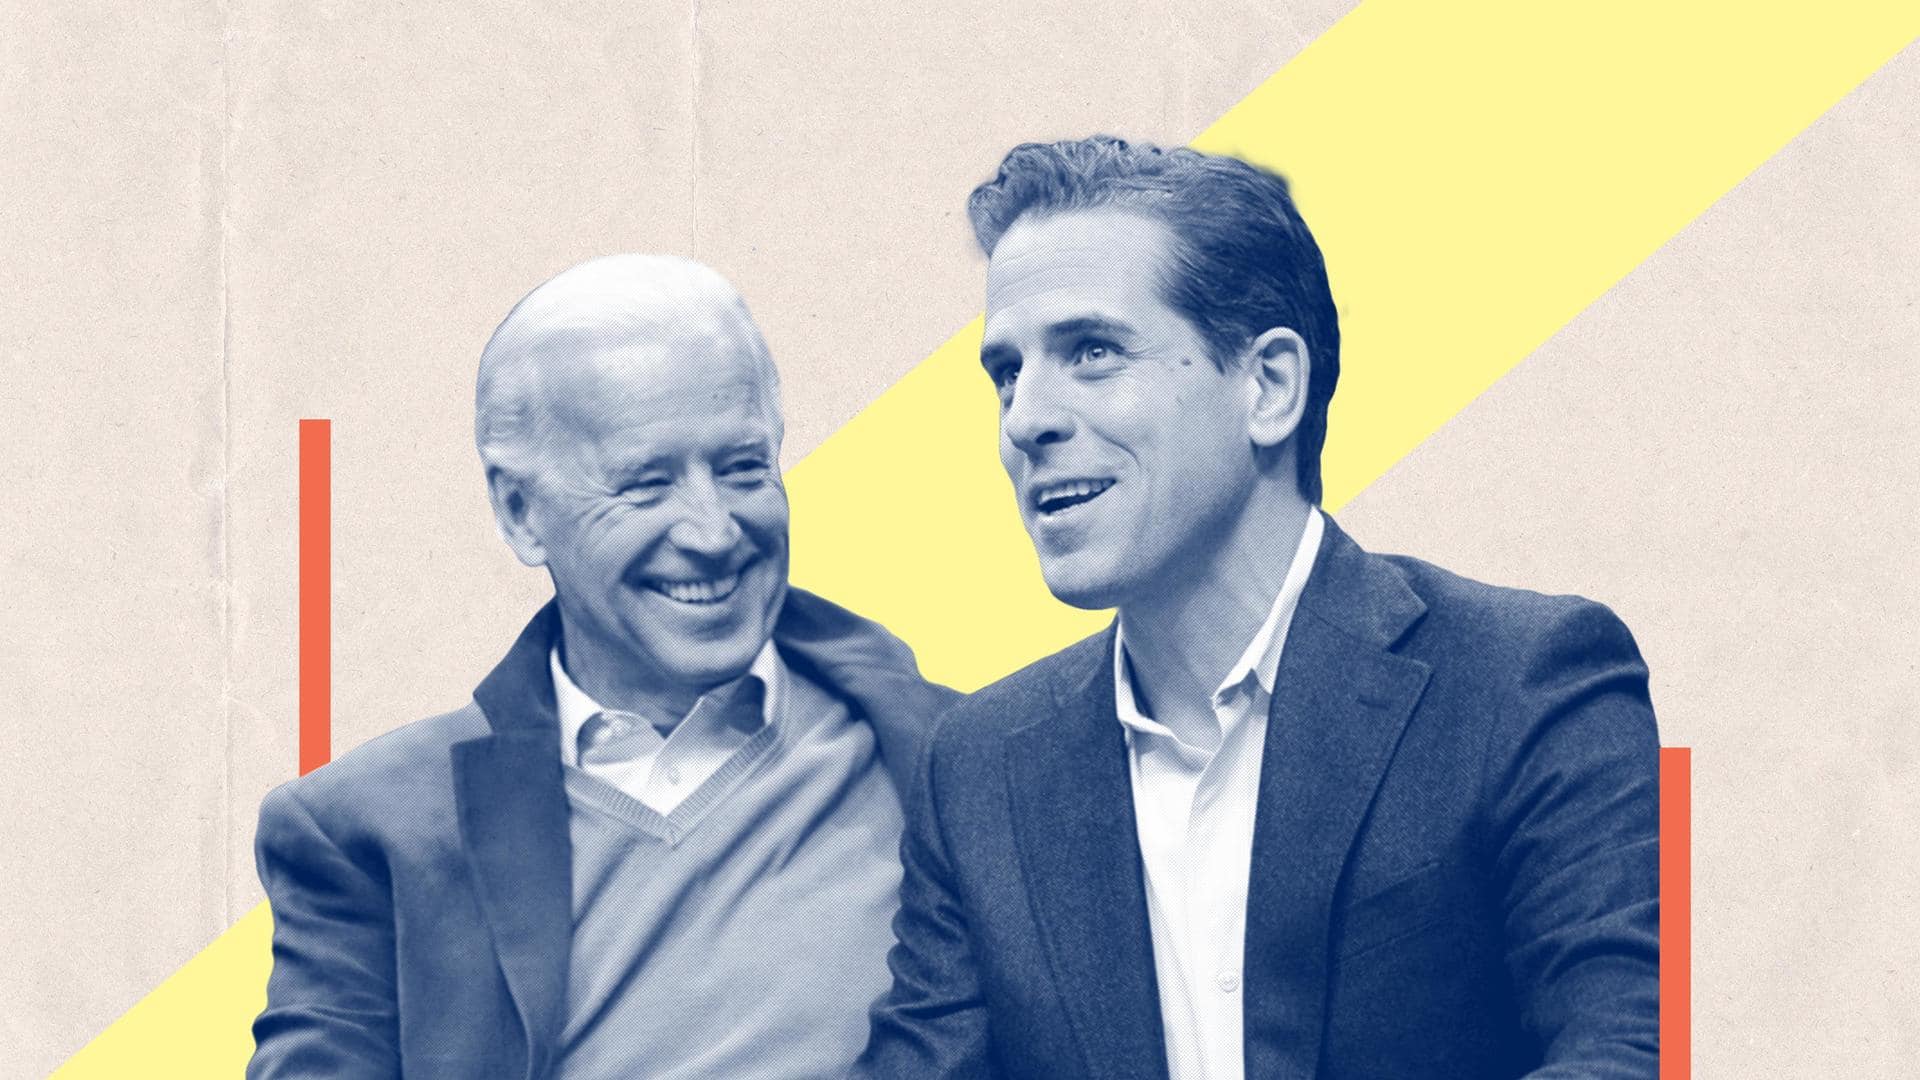 #NewsBytesExplainer: Why President Joe Biden's son may face serious charges